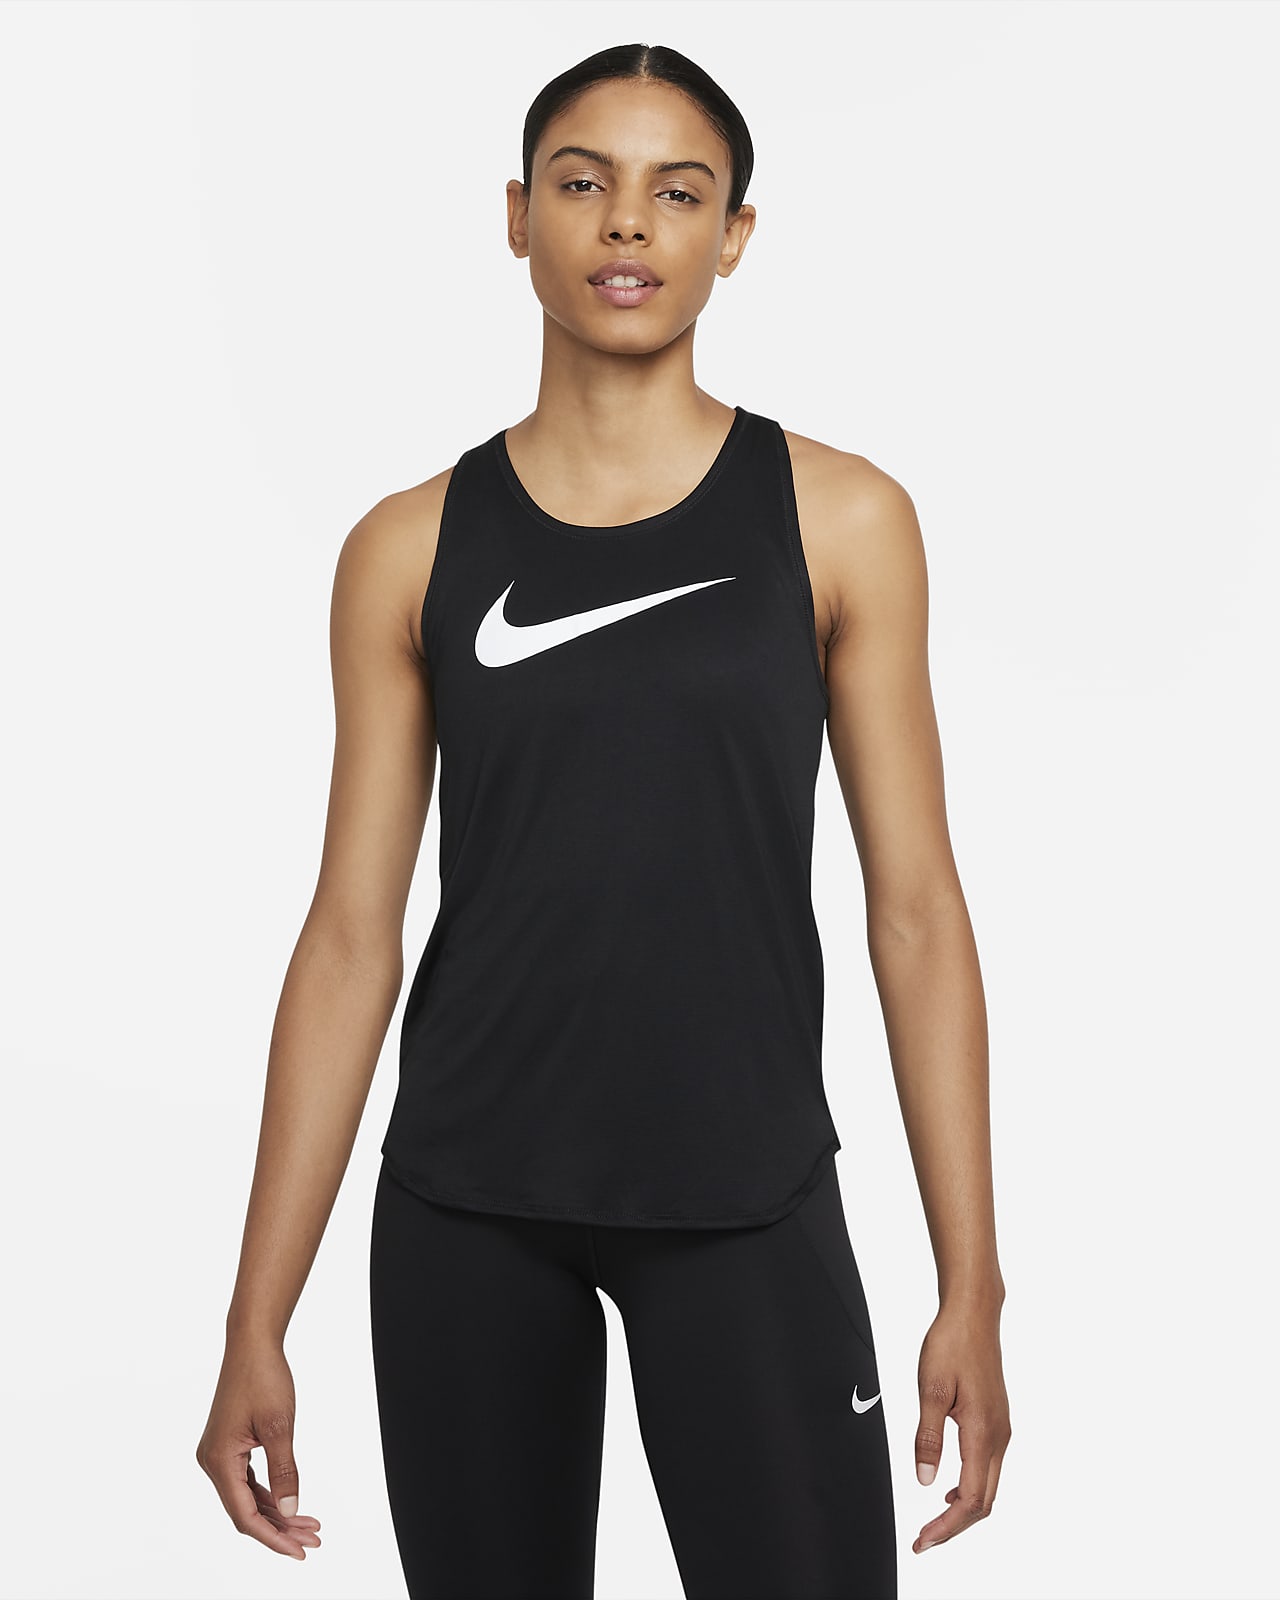 Nike Running Hoodie Shirt Women's Small Athletic Outdoor Gym Tank